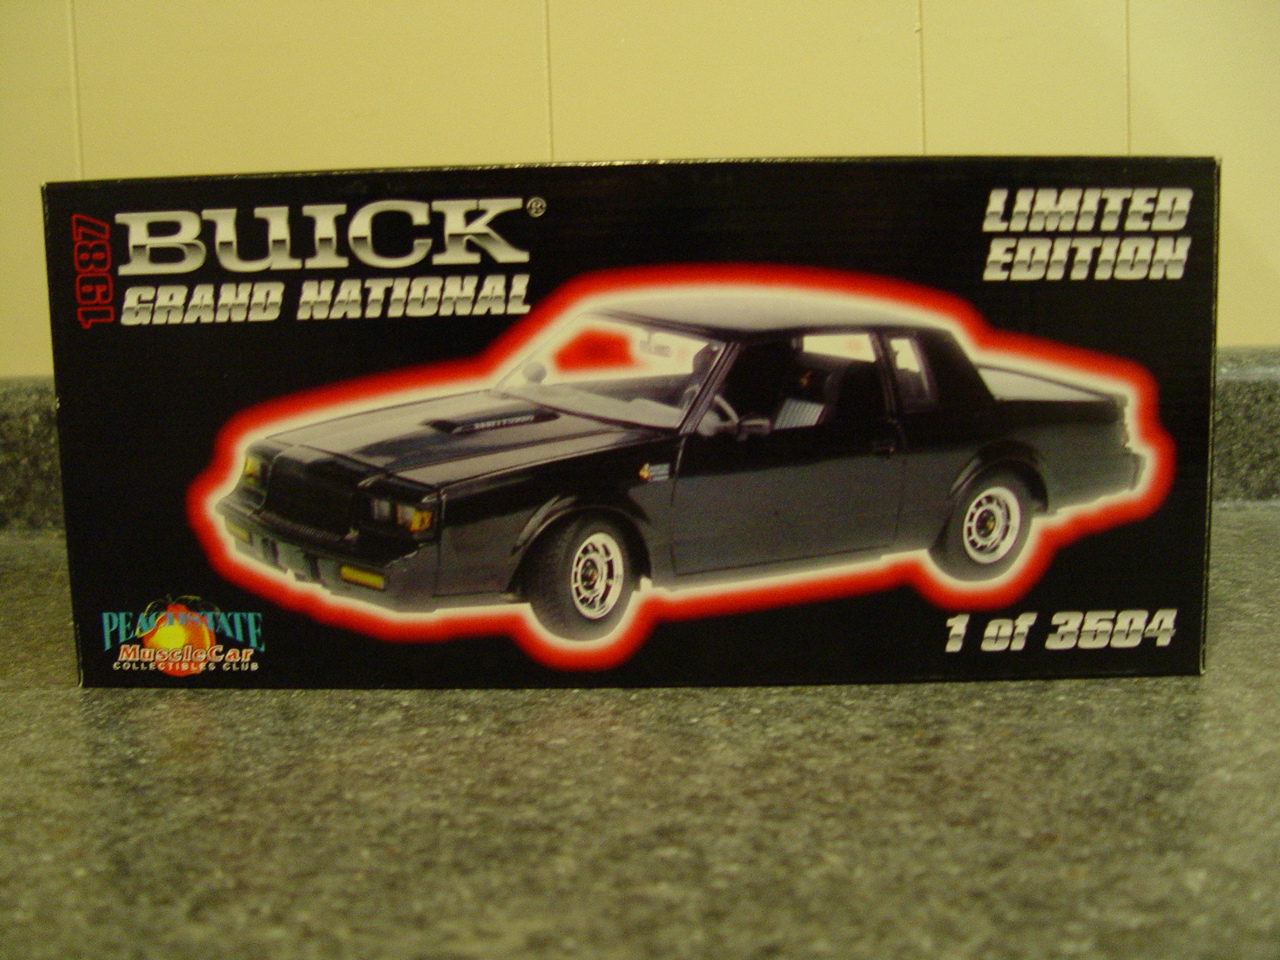 1:18 Scale GMP 8001 1987 Buick Grand National